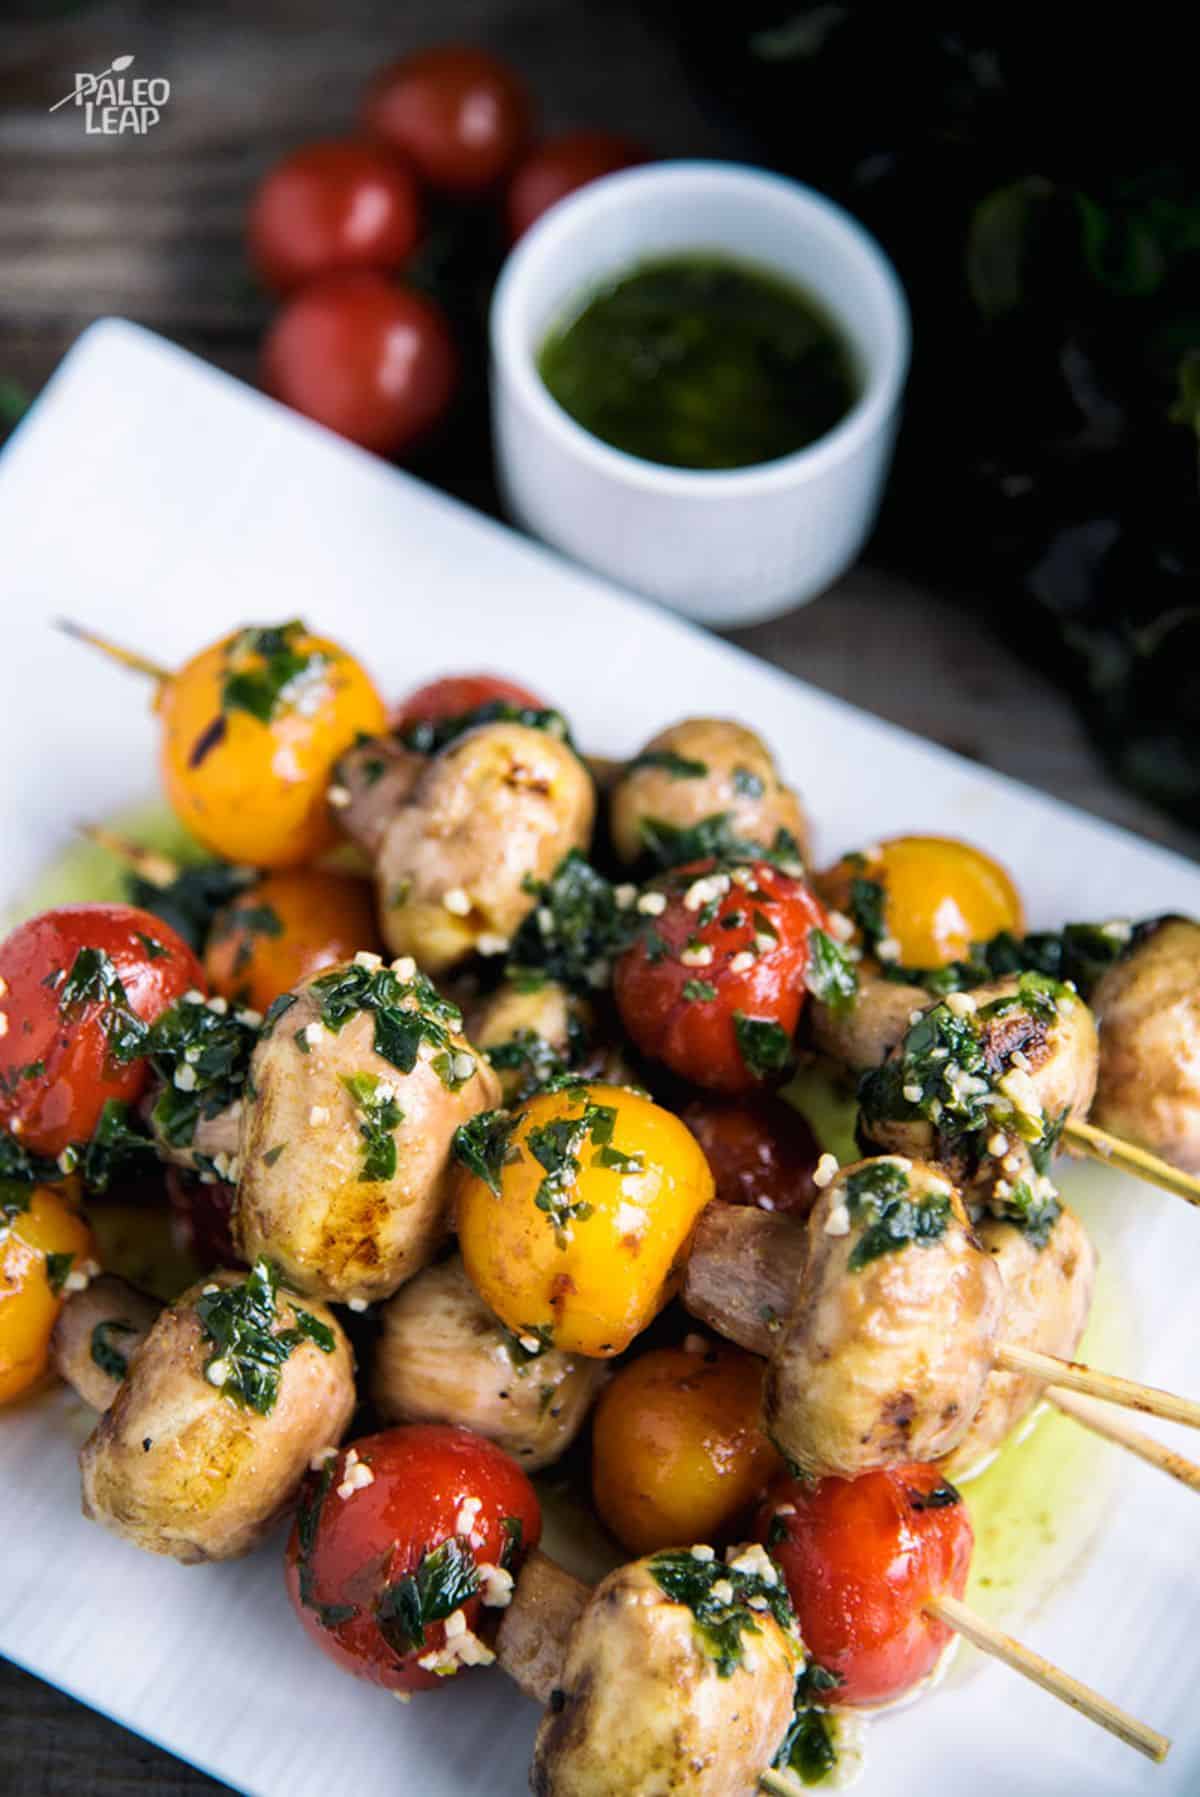 Tomato and Mushroom Skewers With Herb Sauce